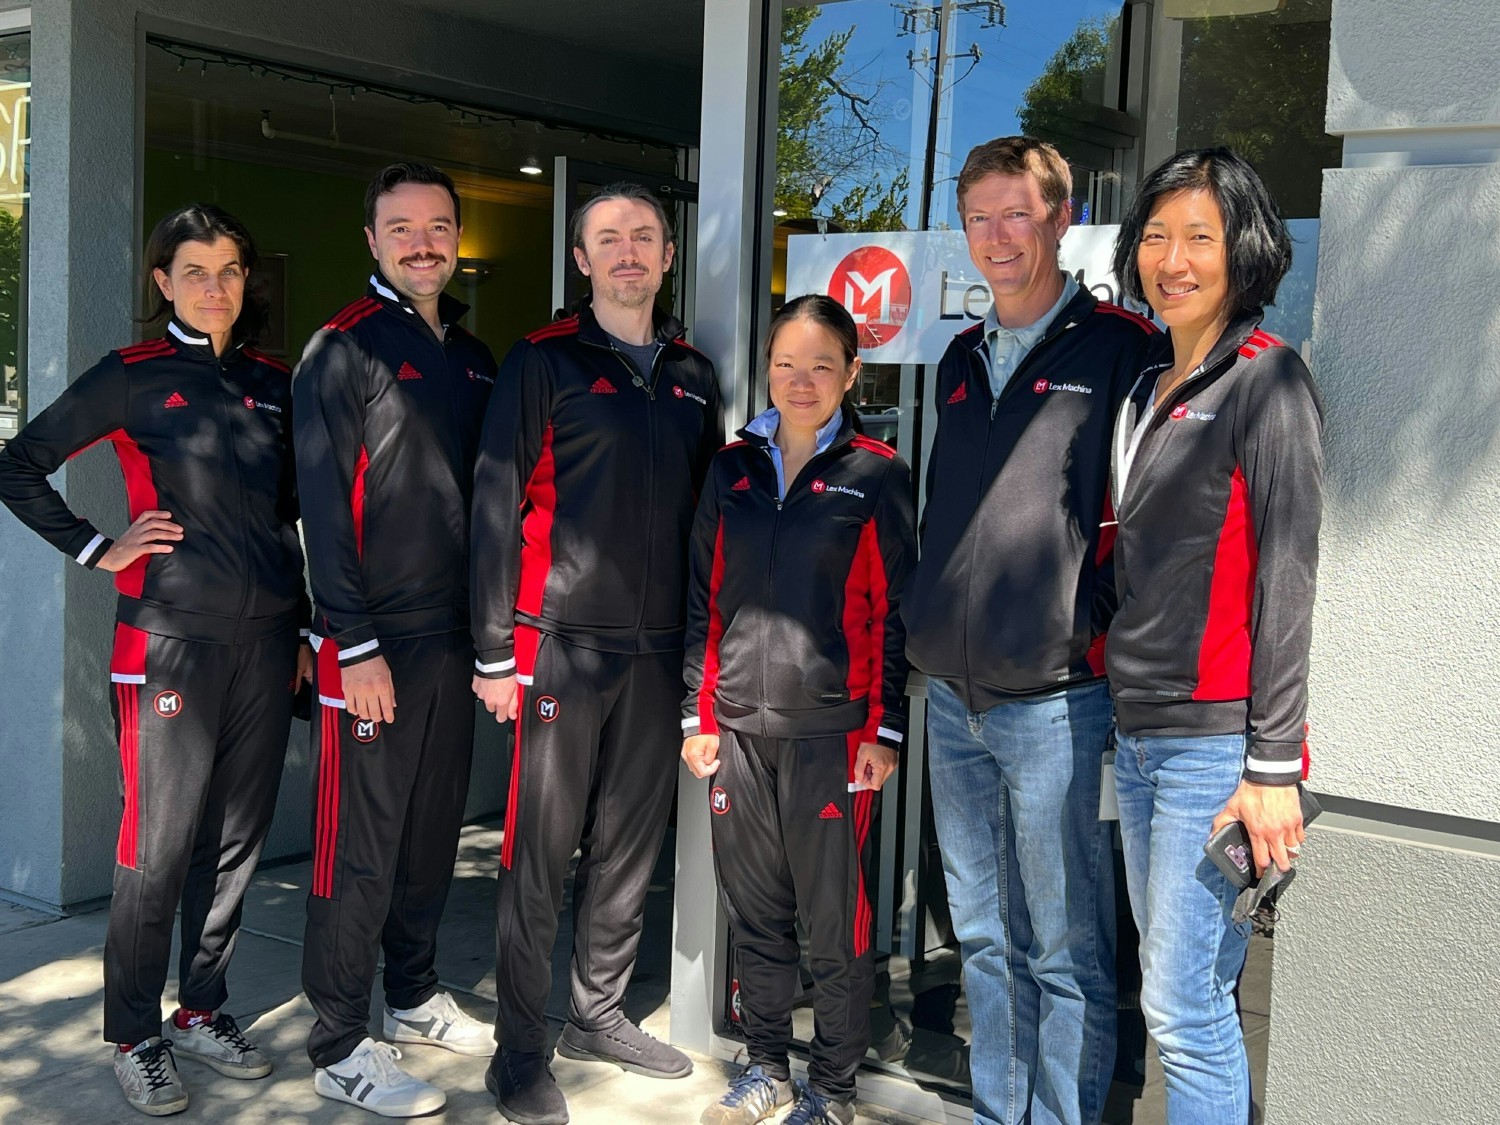 Karl Harris CEO with team showing off our new company branded tracksuits in Menlo Park, CA. 